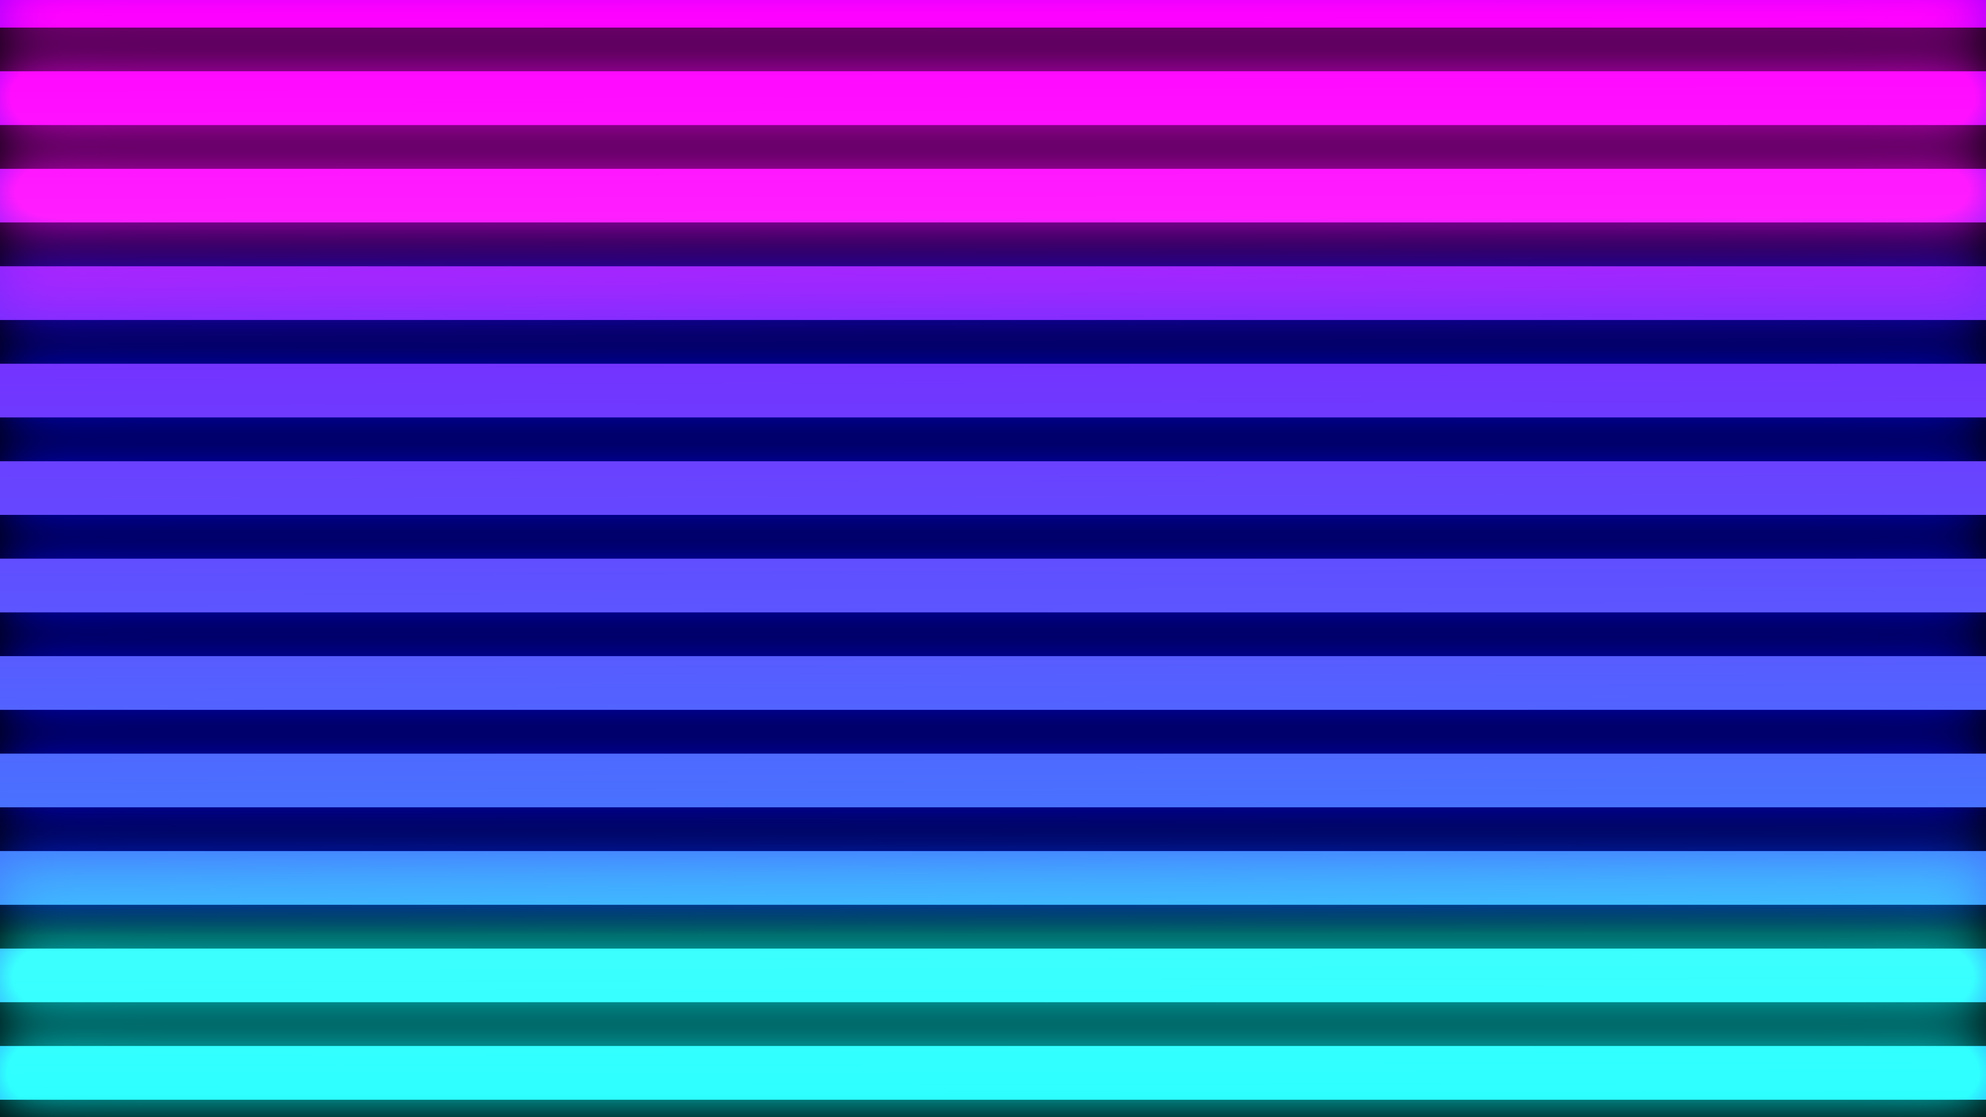 Retro style 80s surface grid Background